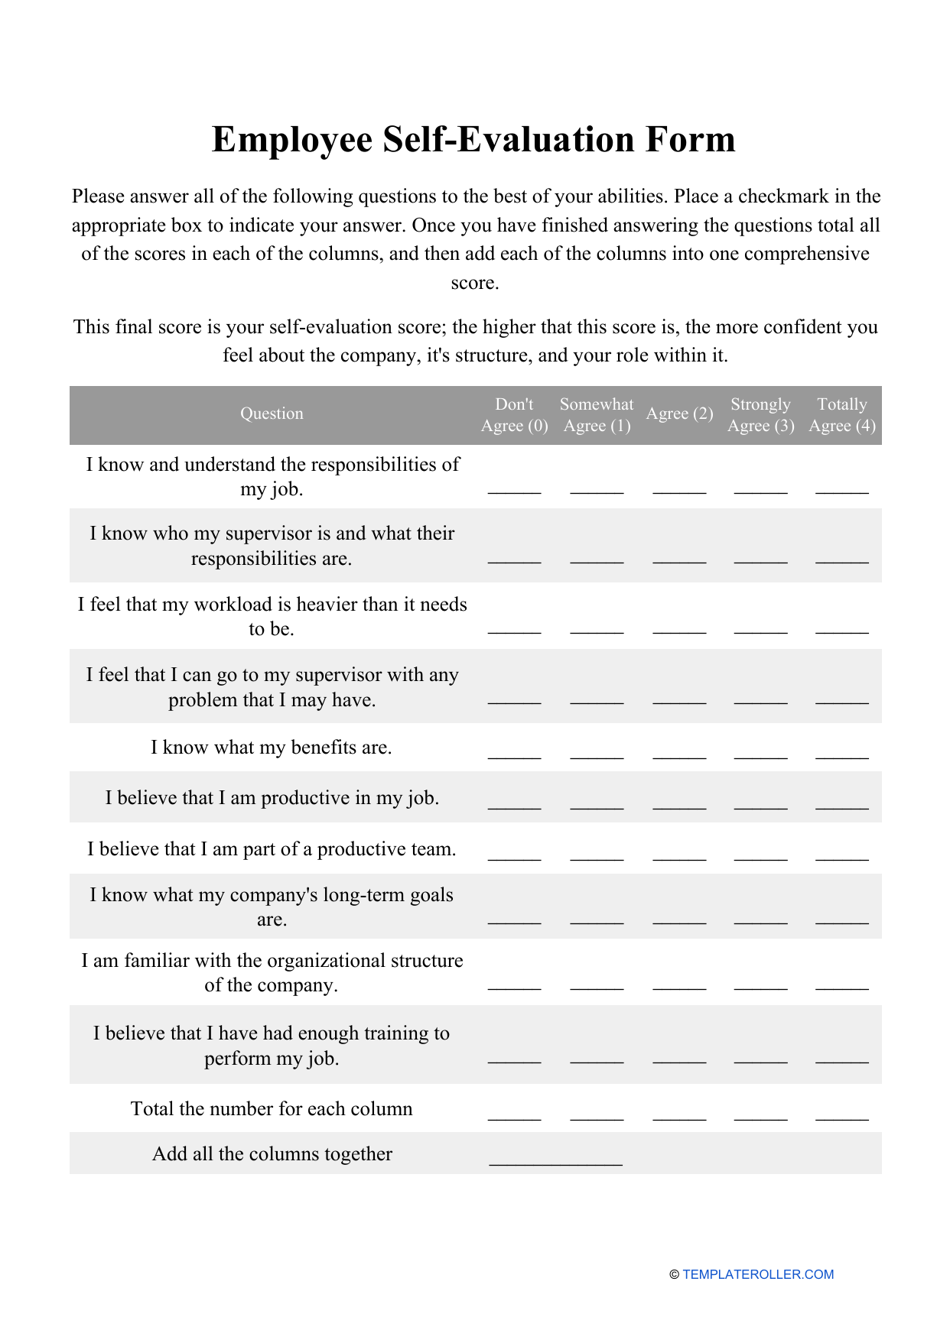 Employee Self Evaluation Form Download Printable PDF | Templateroller